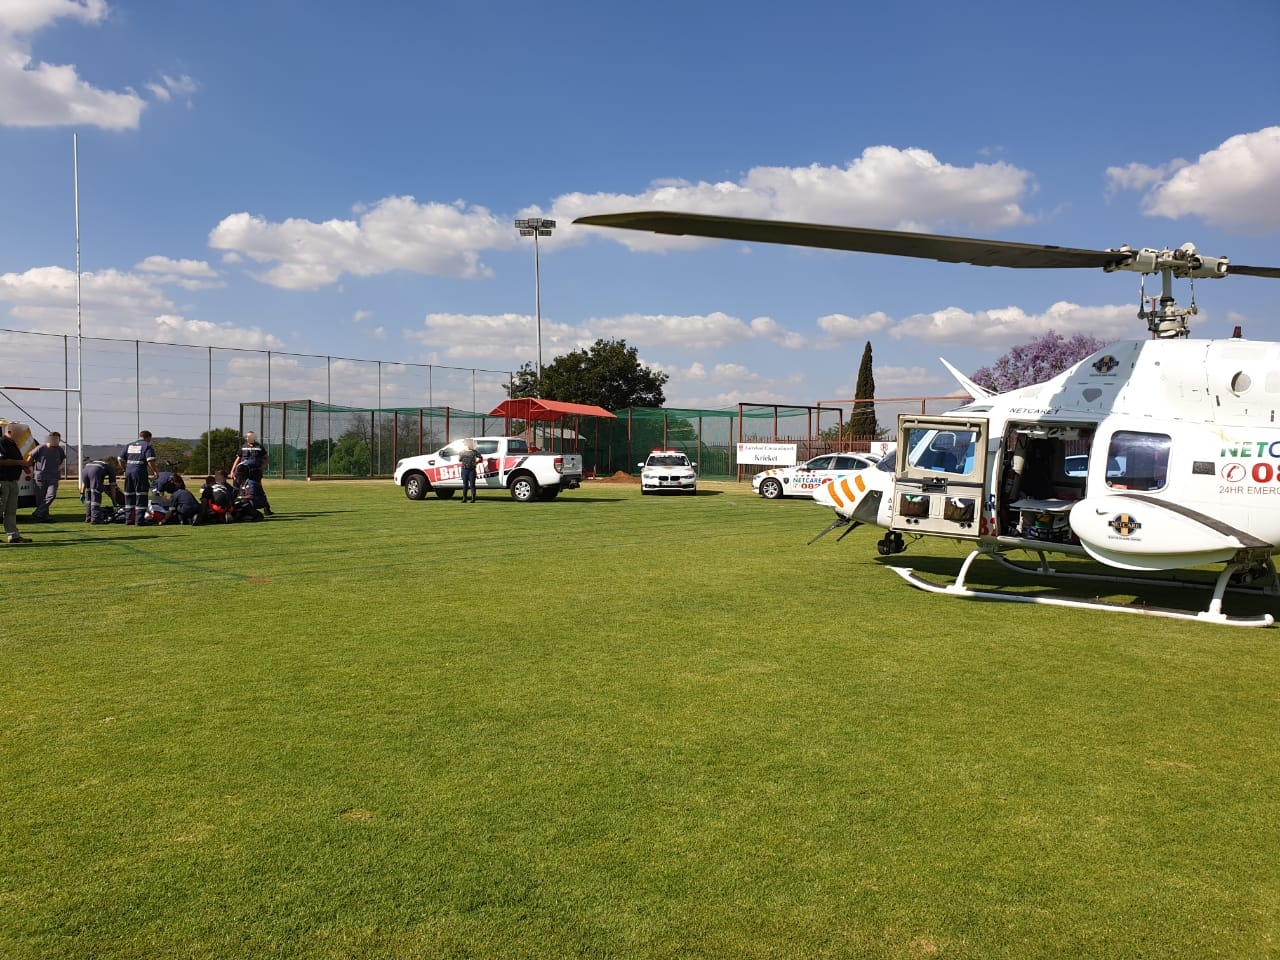 Helicopter Airlifts man following electrocution